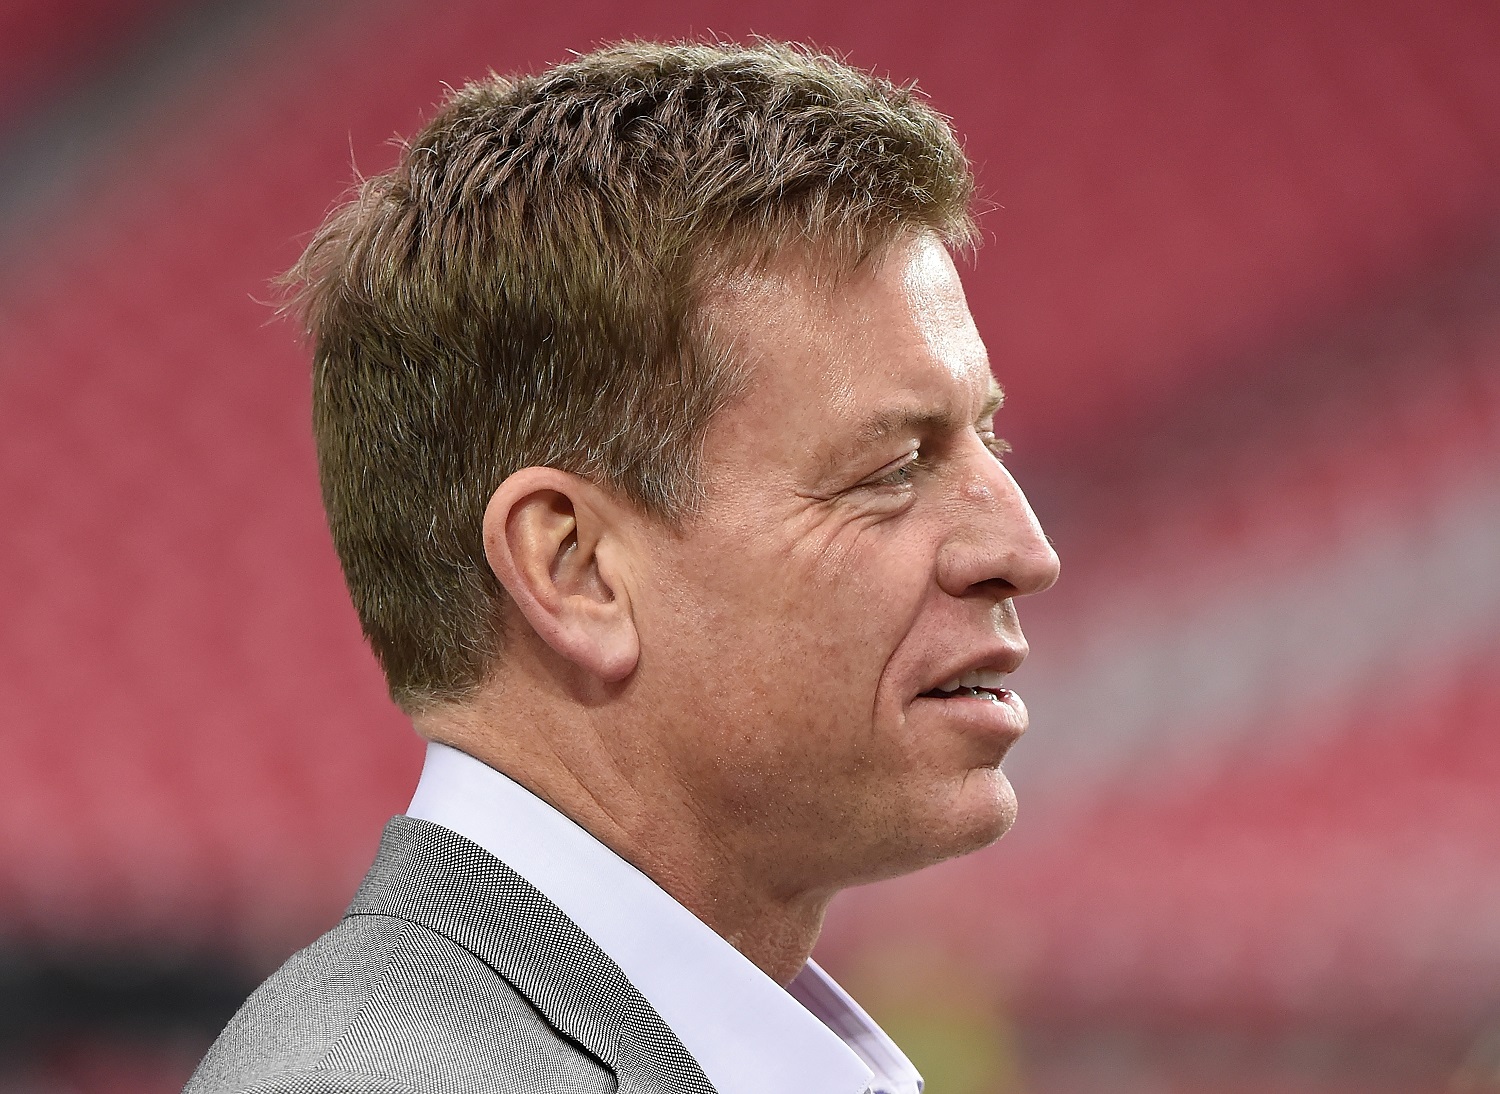 Troy Aikman was diagnosed with cancer while still playing with the cowboys, but kept it relatively quiet for nearly two decades.